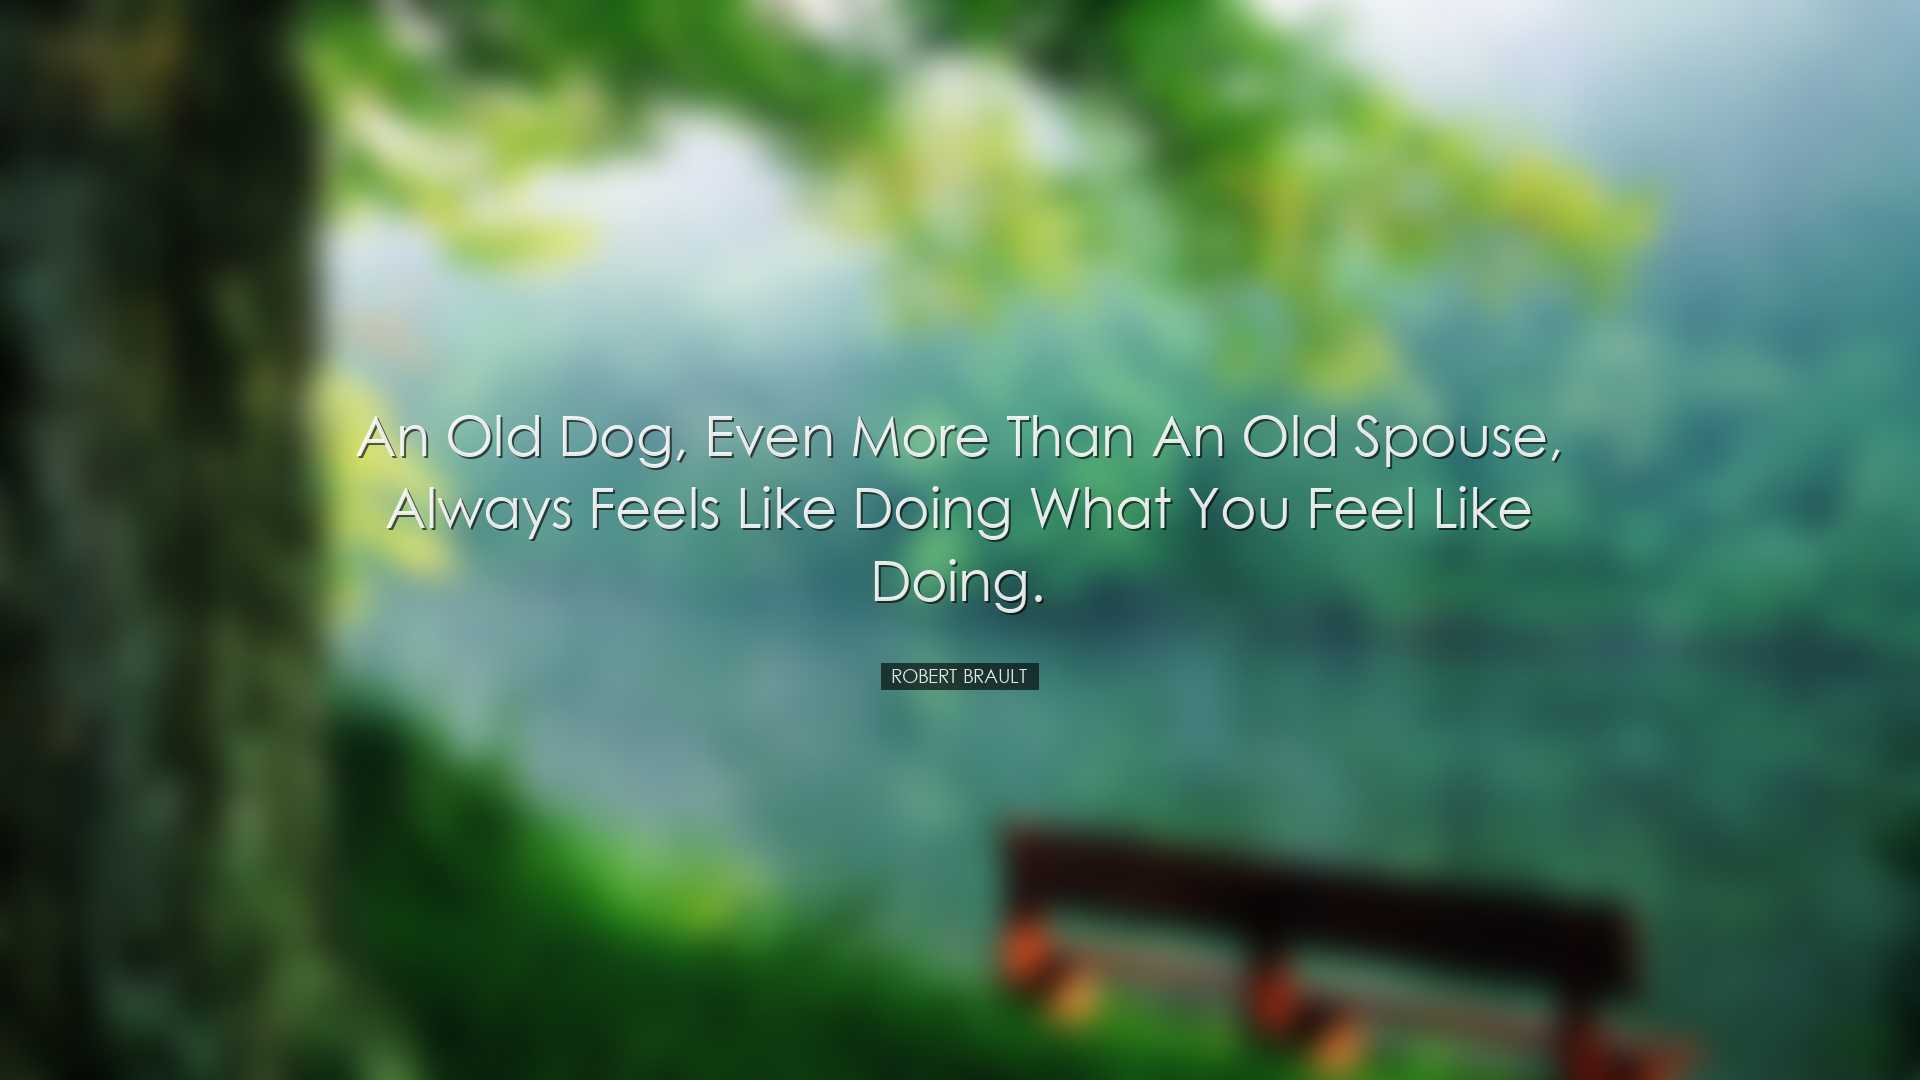 An old dog, even more than an old spouse, always feels like doing